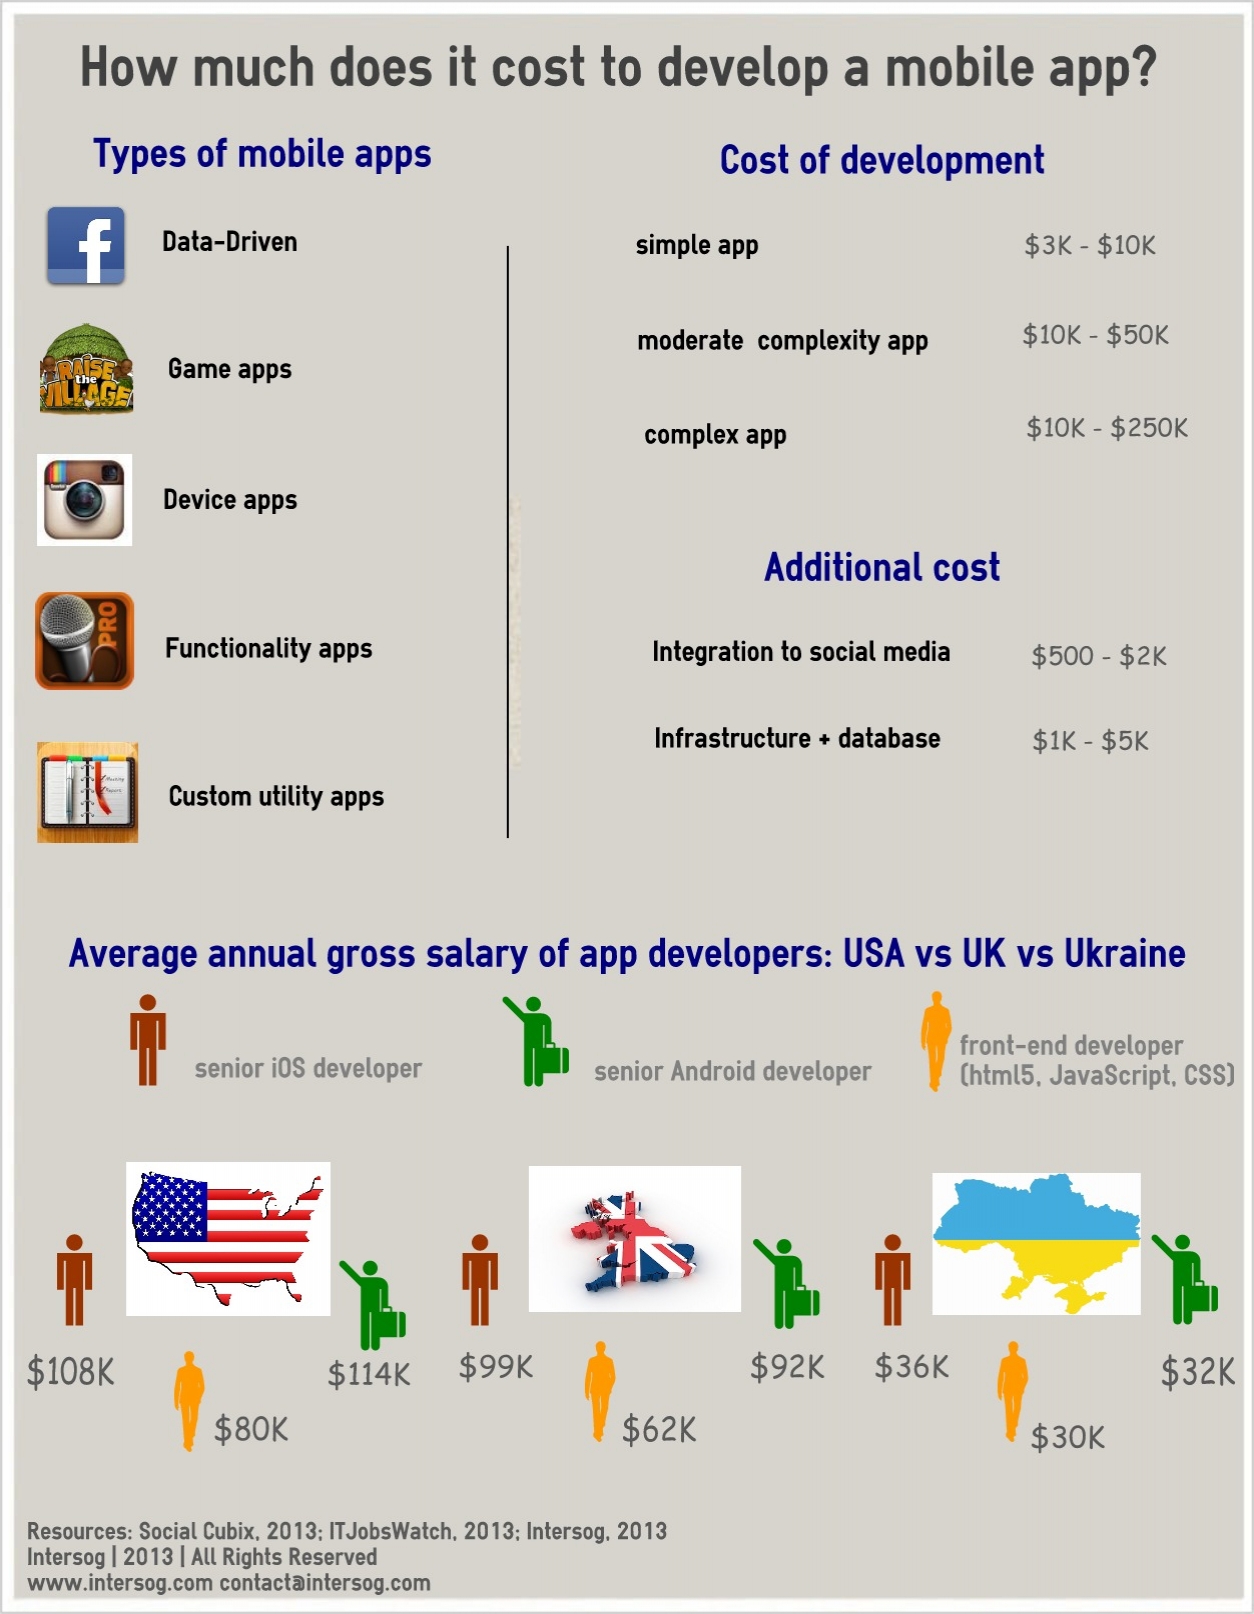 How Much Does It Cost To Develop a Mobile App?